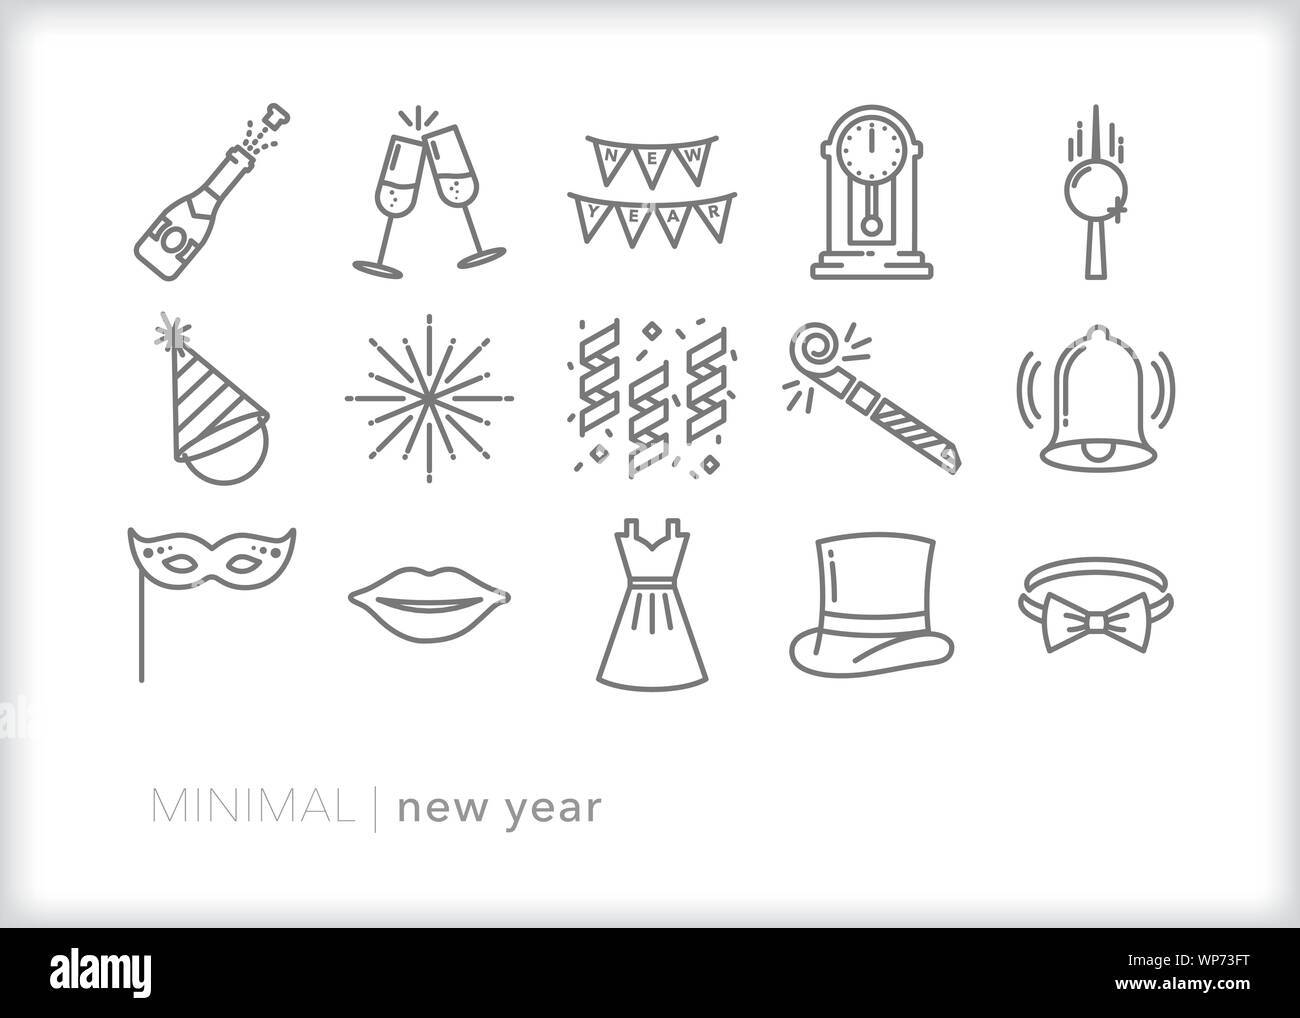 Set of 15 new year line icons for a new years eve party Stock Vector